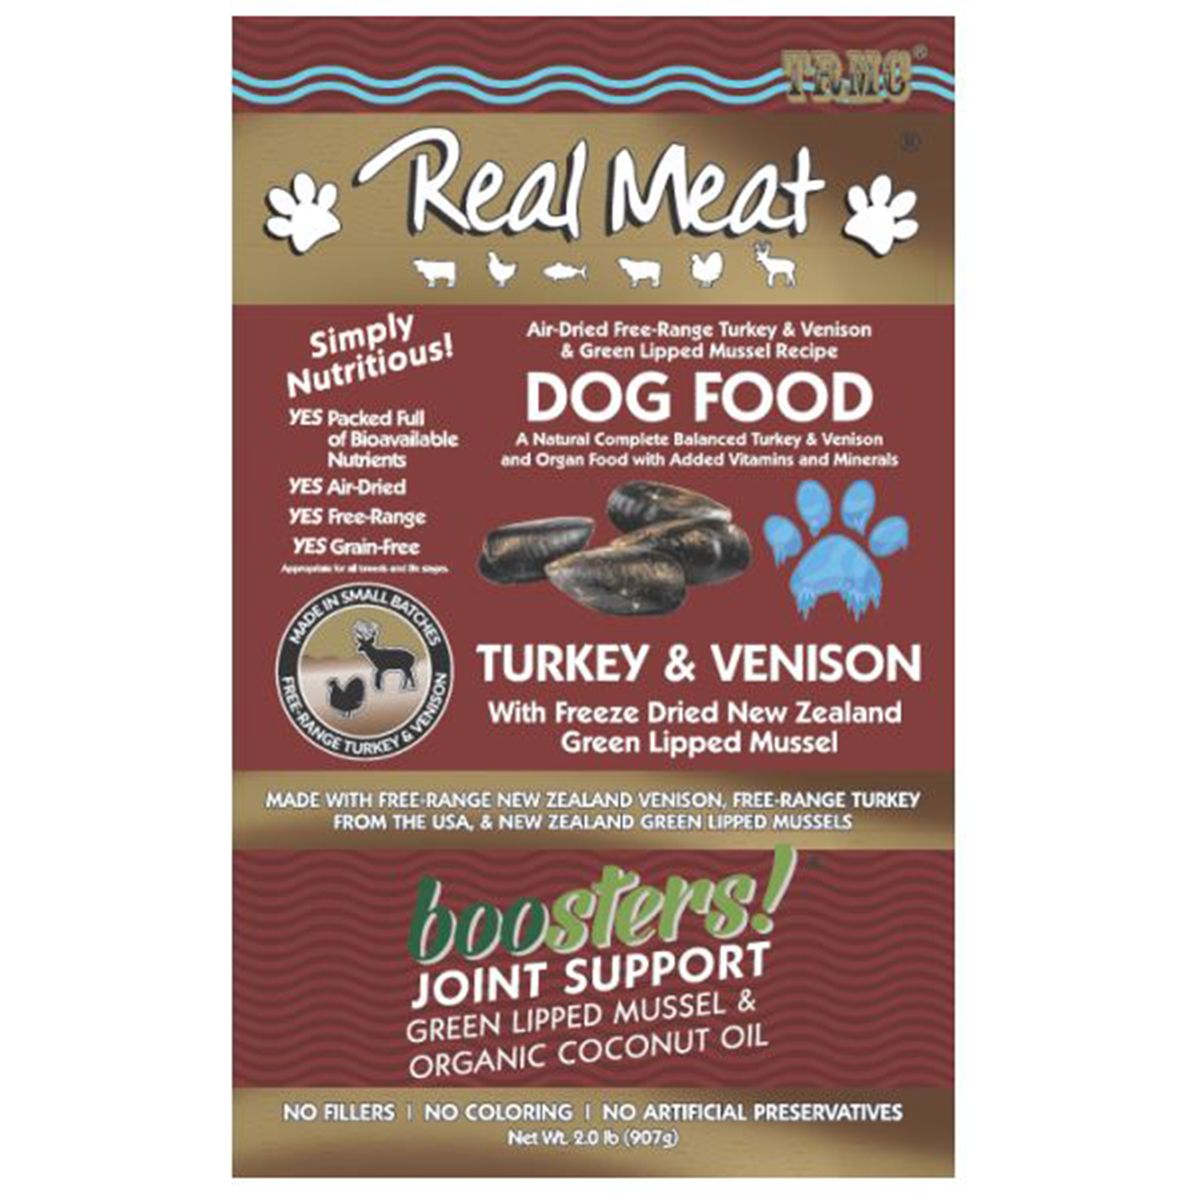 Real Meat Boosters Joint Support Air-Dried Dog Food - Turkey & Venison